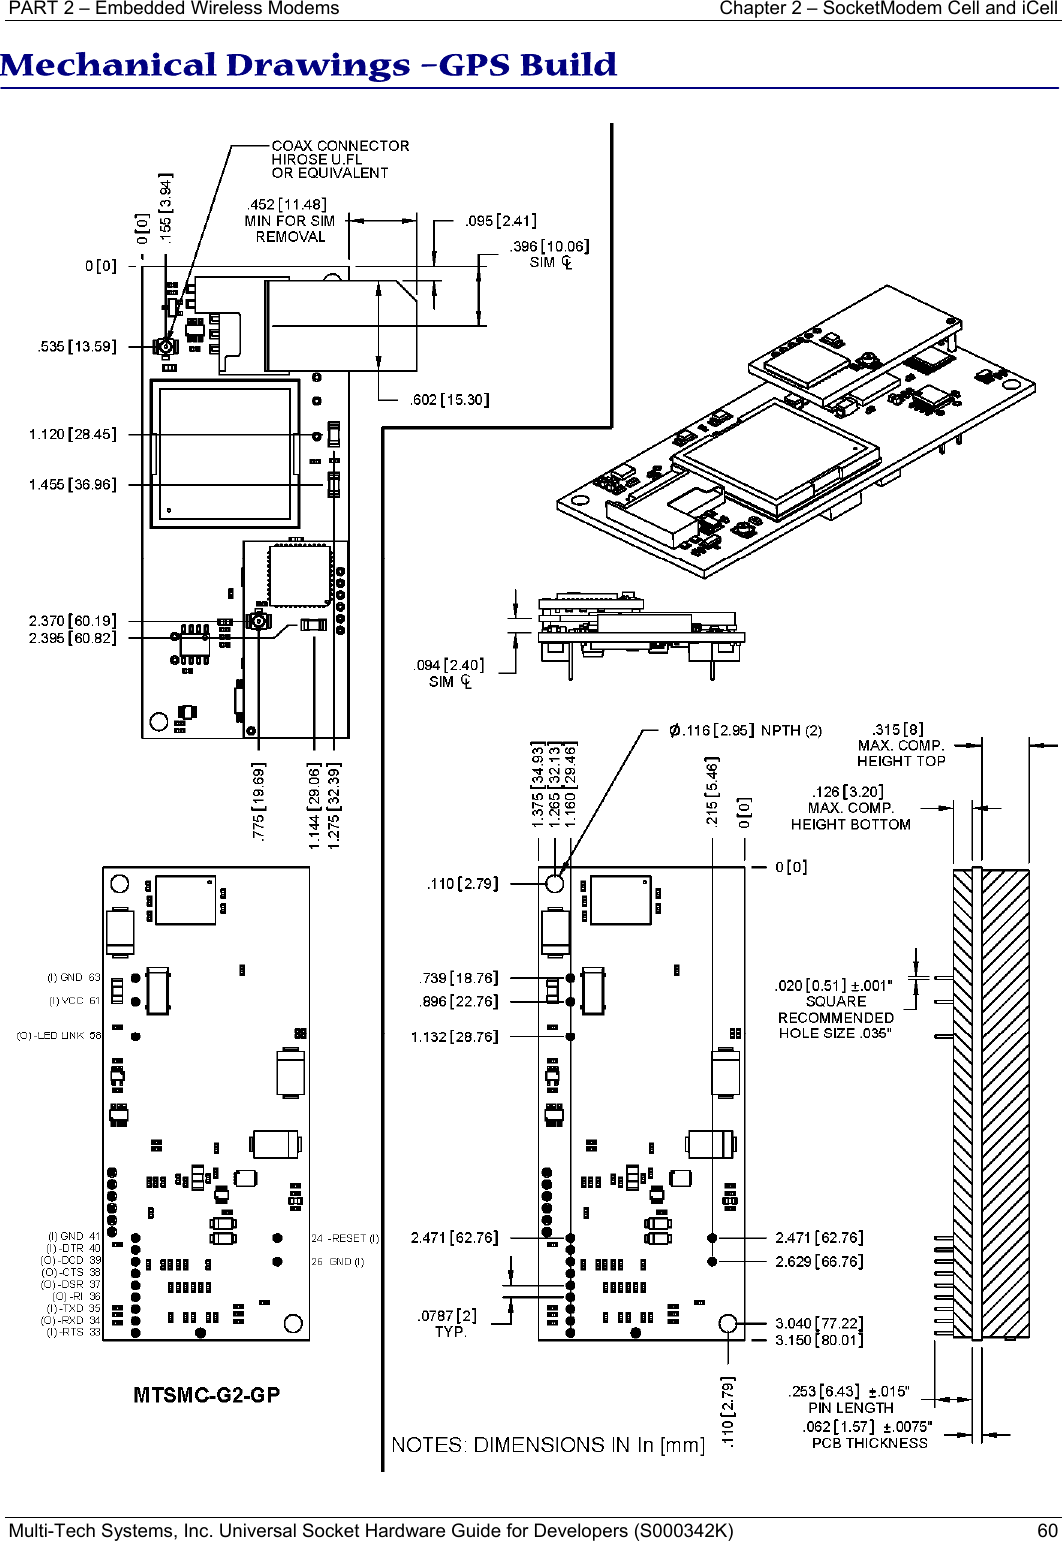 PART 2 – Embedded Wireless Modems   Chapter 2 – SocketModem Cell and iCell Multi-Tech Systems, Inc. Universal Socket Hardware Guide for Developers (S000342K)  60  Mechanical Drawings –GPS Build  